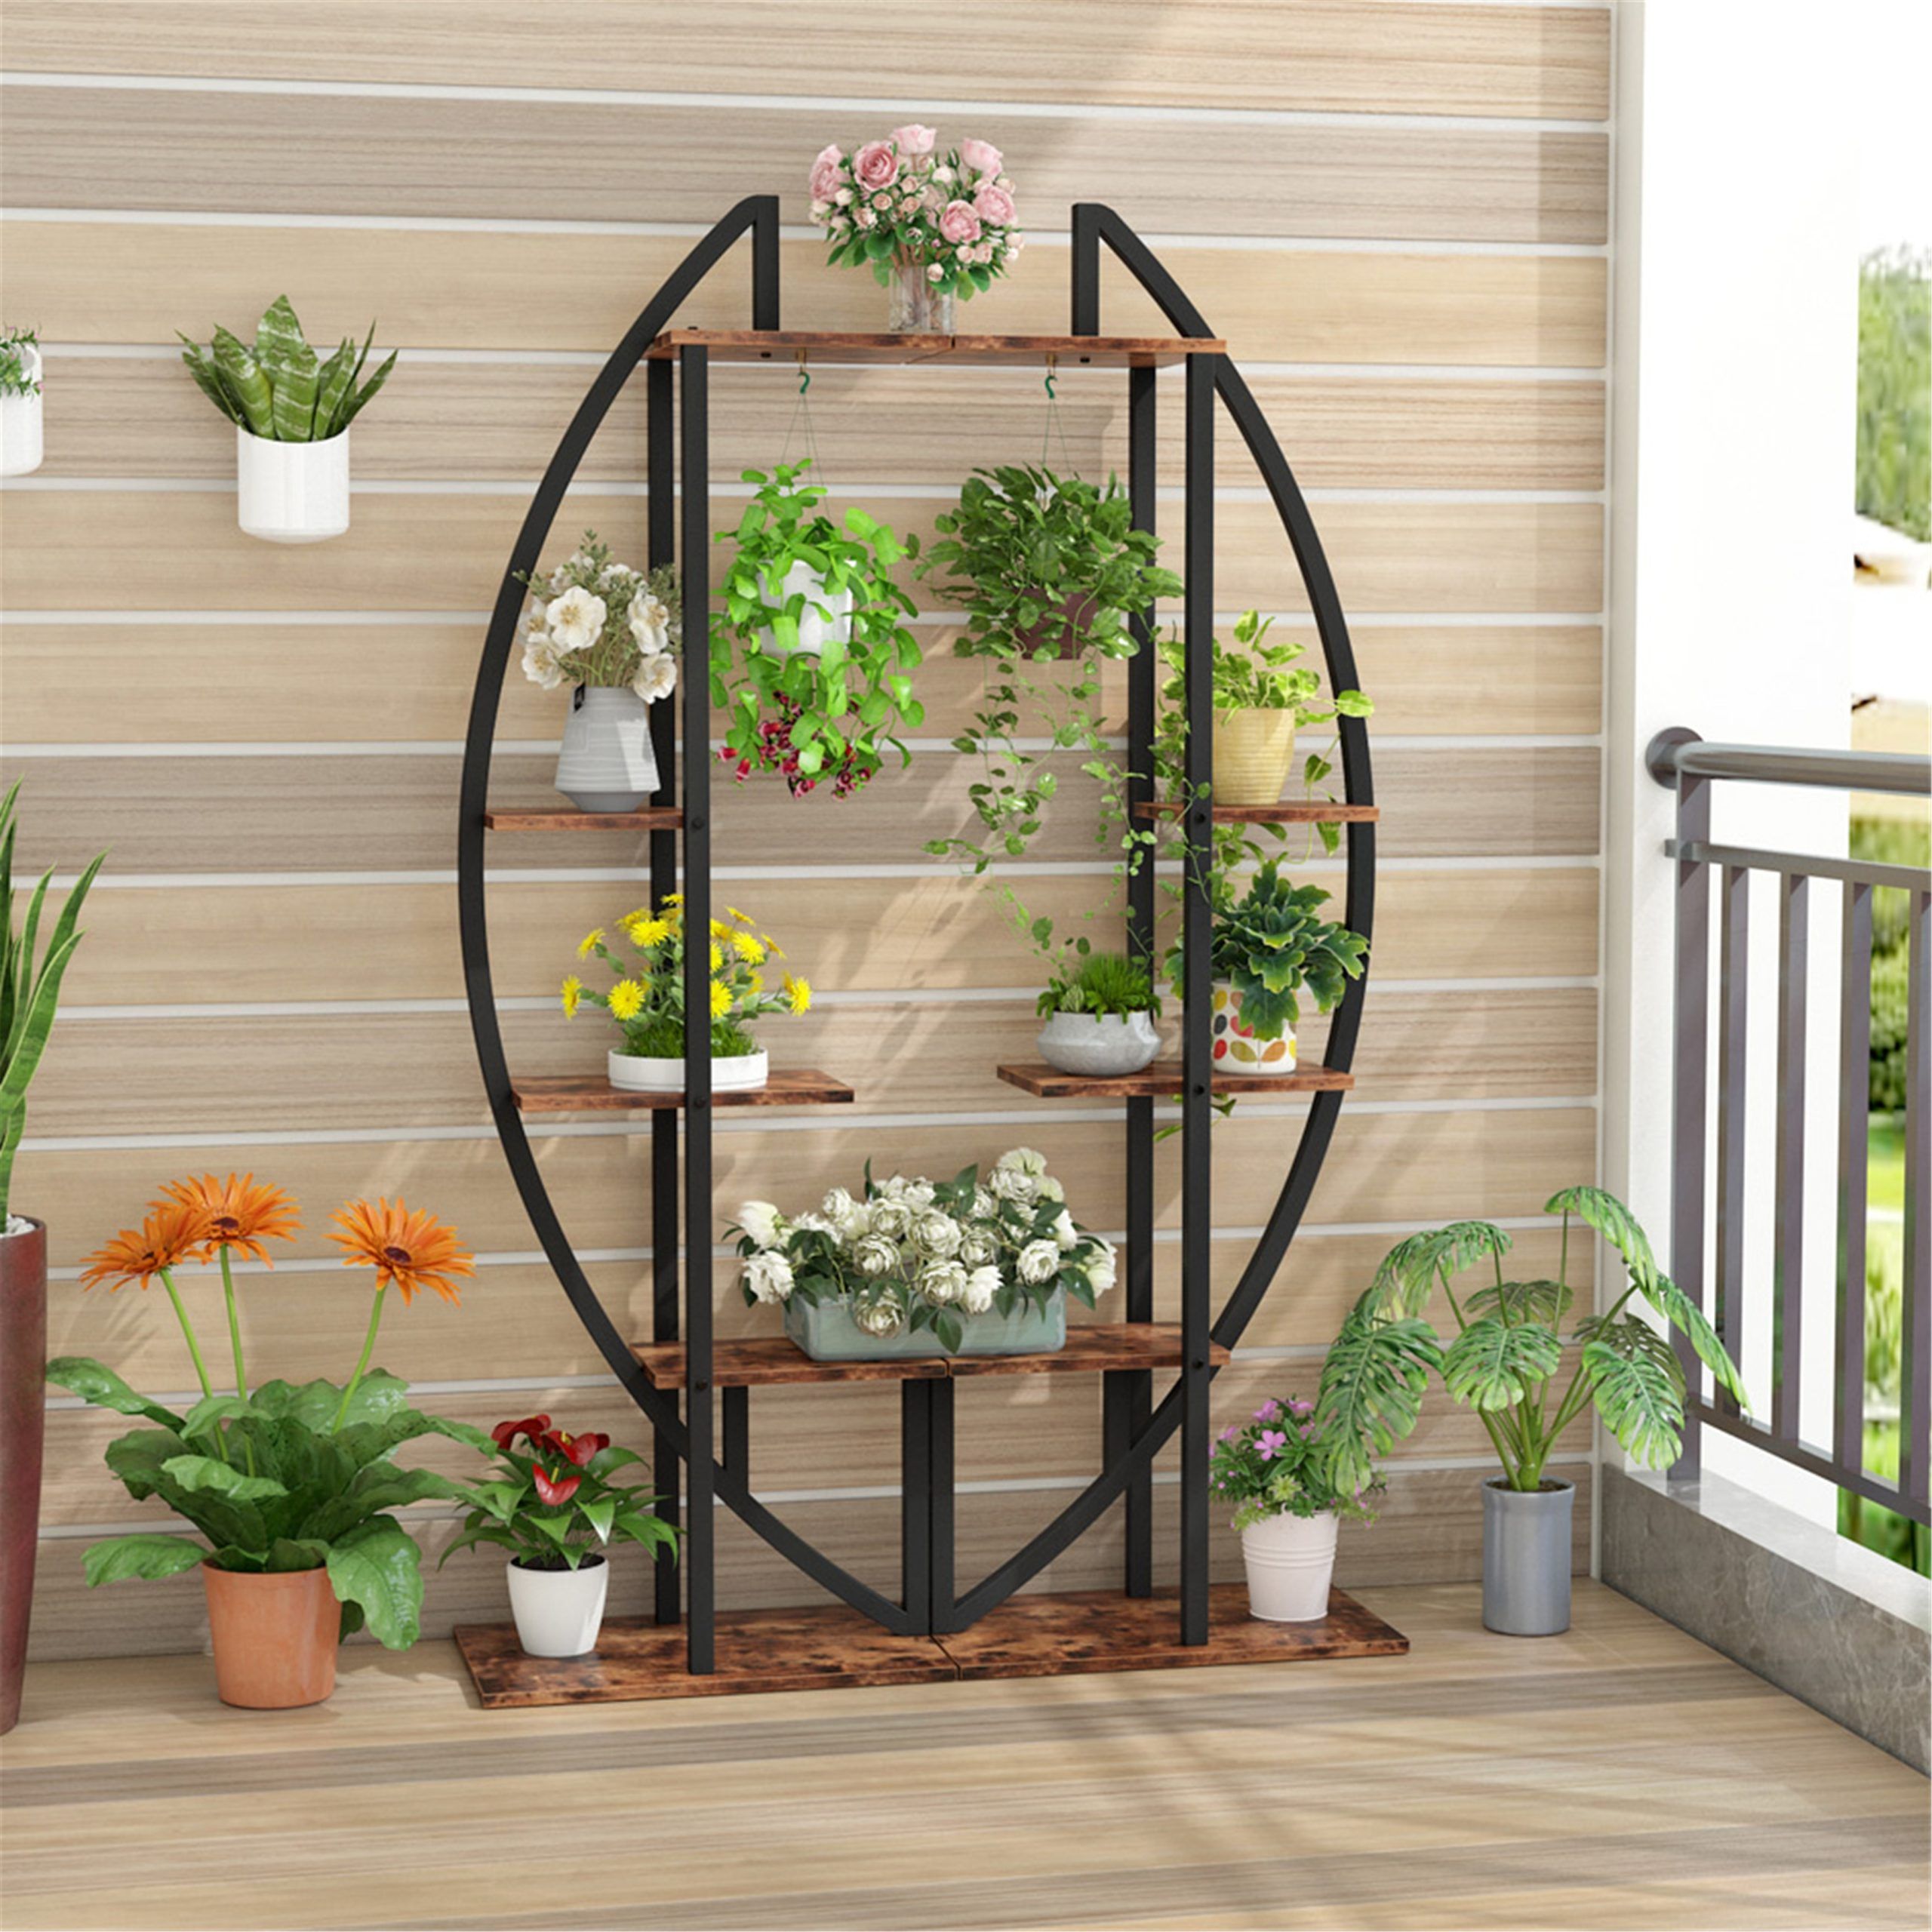 5 Tier Patio Flower Rack Plant Stands (Set Of 2) – Overstock – 30393784 With 5 Inch Plant Stands (View 4 of 15)